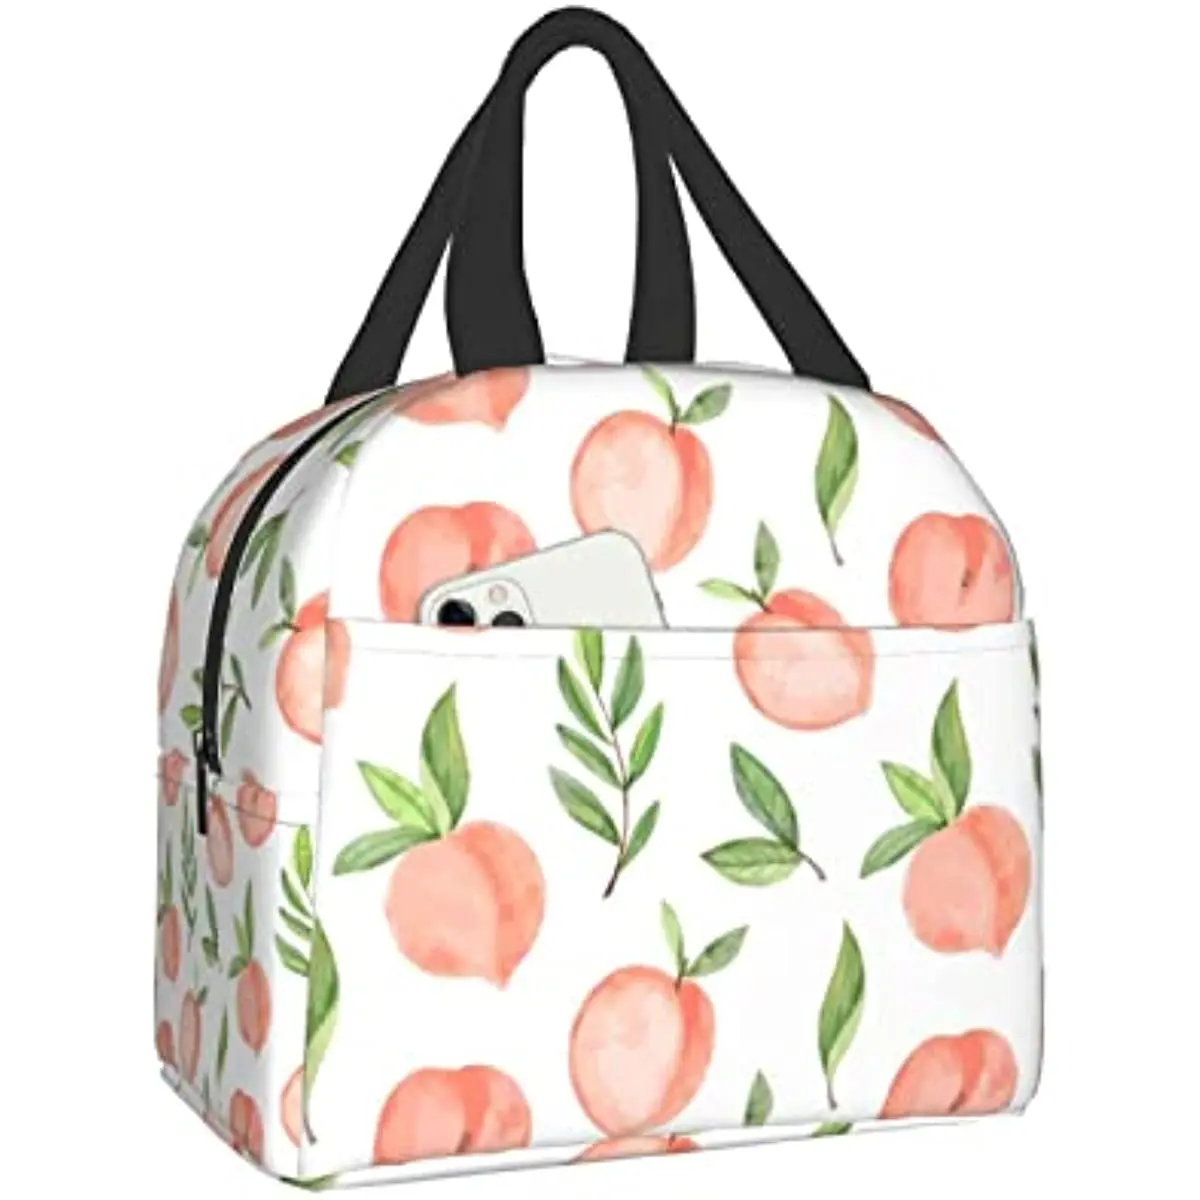 

Lunch Bag for Teen Cute Peach Insulated Lunch Box Cooler Thermal Waterproof Reusable Tote Bag for Women Travel Work Picnic